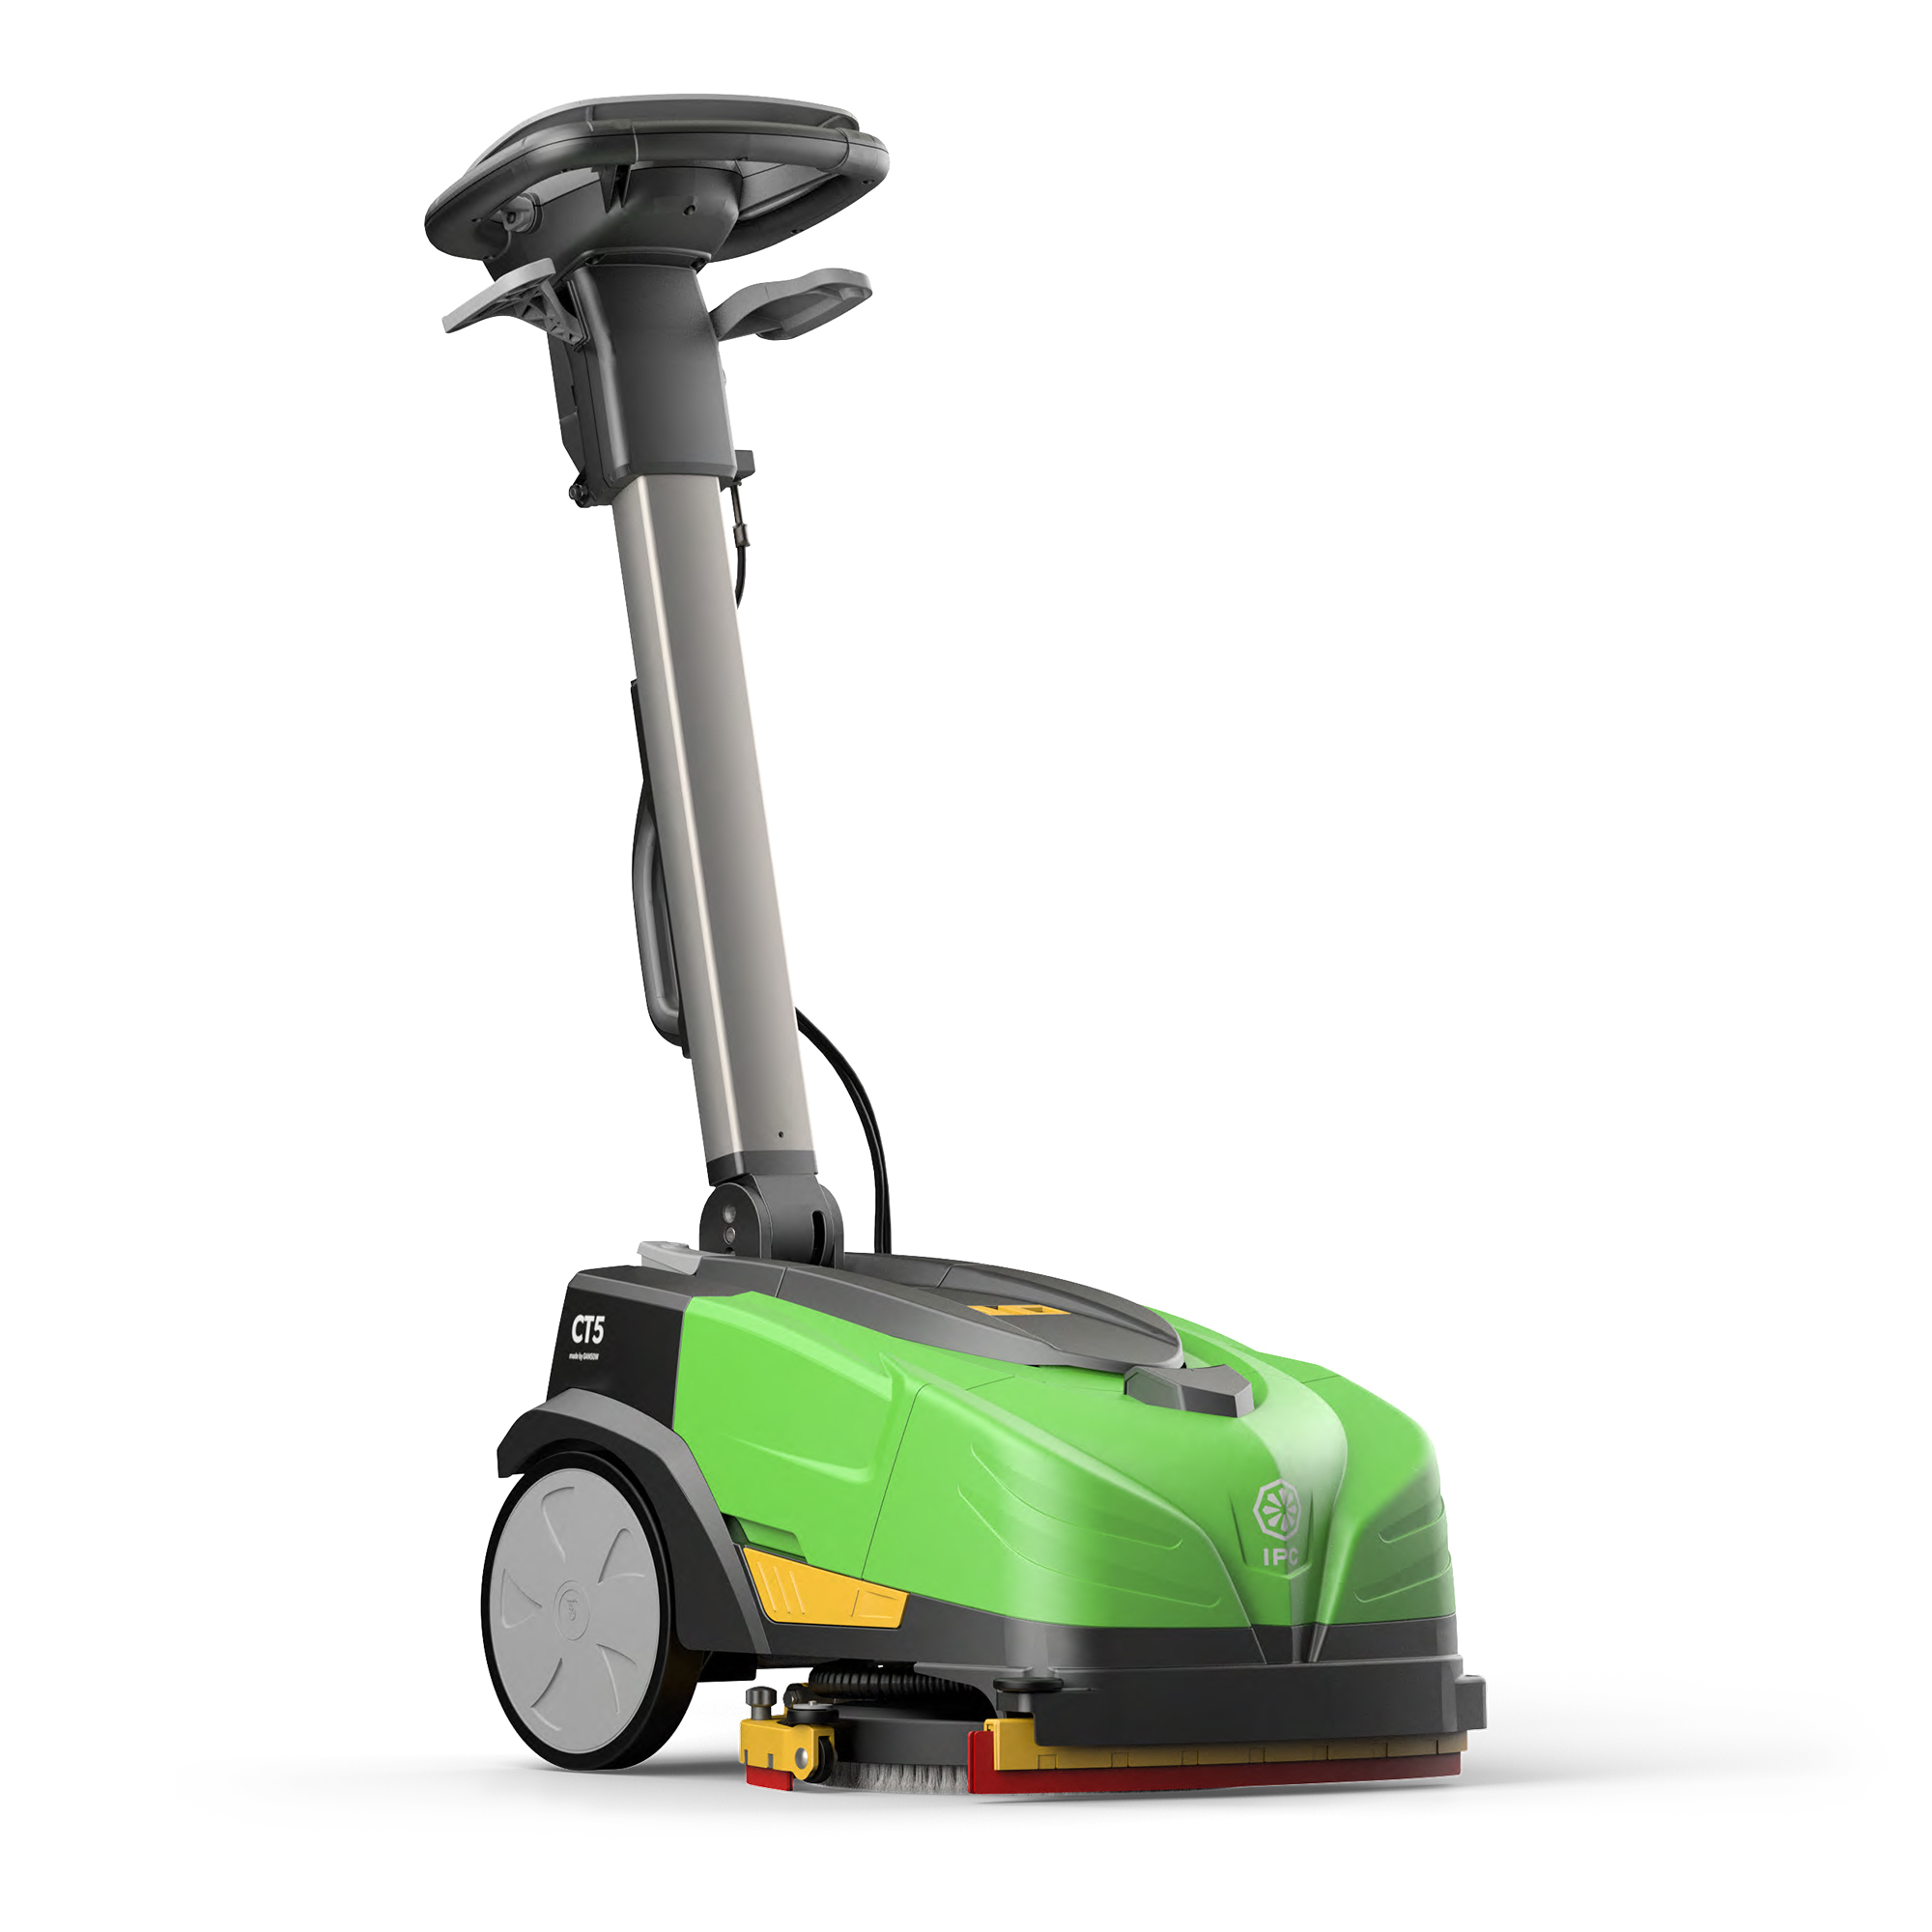 IPC Eagle, 11Inch Compact Floor Scrubber Battery Powered, Capacity 1.3 Gal, Model CT5